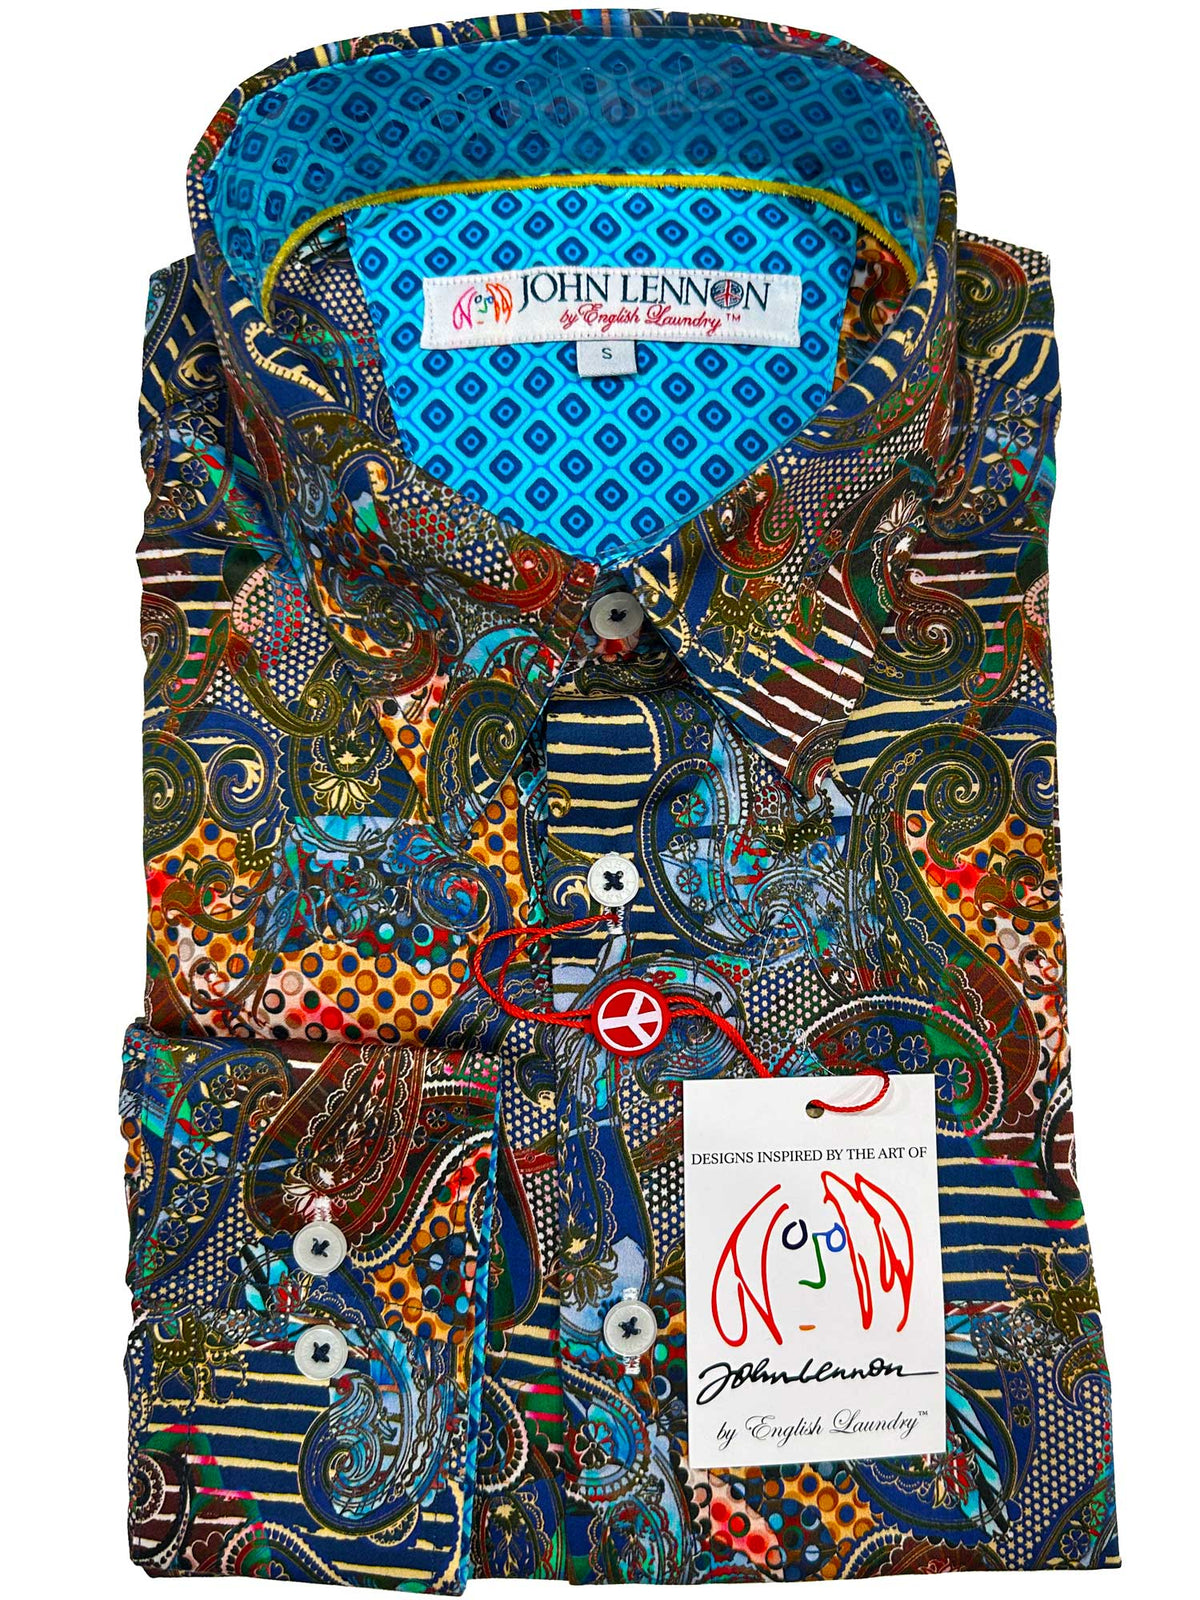 Buy JLW8204 L Whitby  https://harrysformenswear.com.au/products/jlw8203-l-hartlepool  Slim Fit by John Lennon All Cotton Long Sleeve with a touch of classic detailing that reflects the fashion and sense of John Lennon's uniqueness. Creating harmony and peace with nature, this shirt does in spades. John Lennon for English Laundry….The Sleeping Giant. Embracing the vintage paisleys and plaids and print…